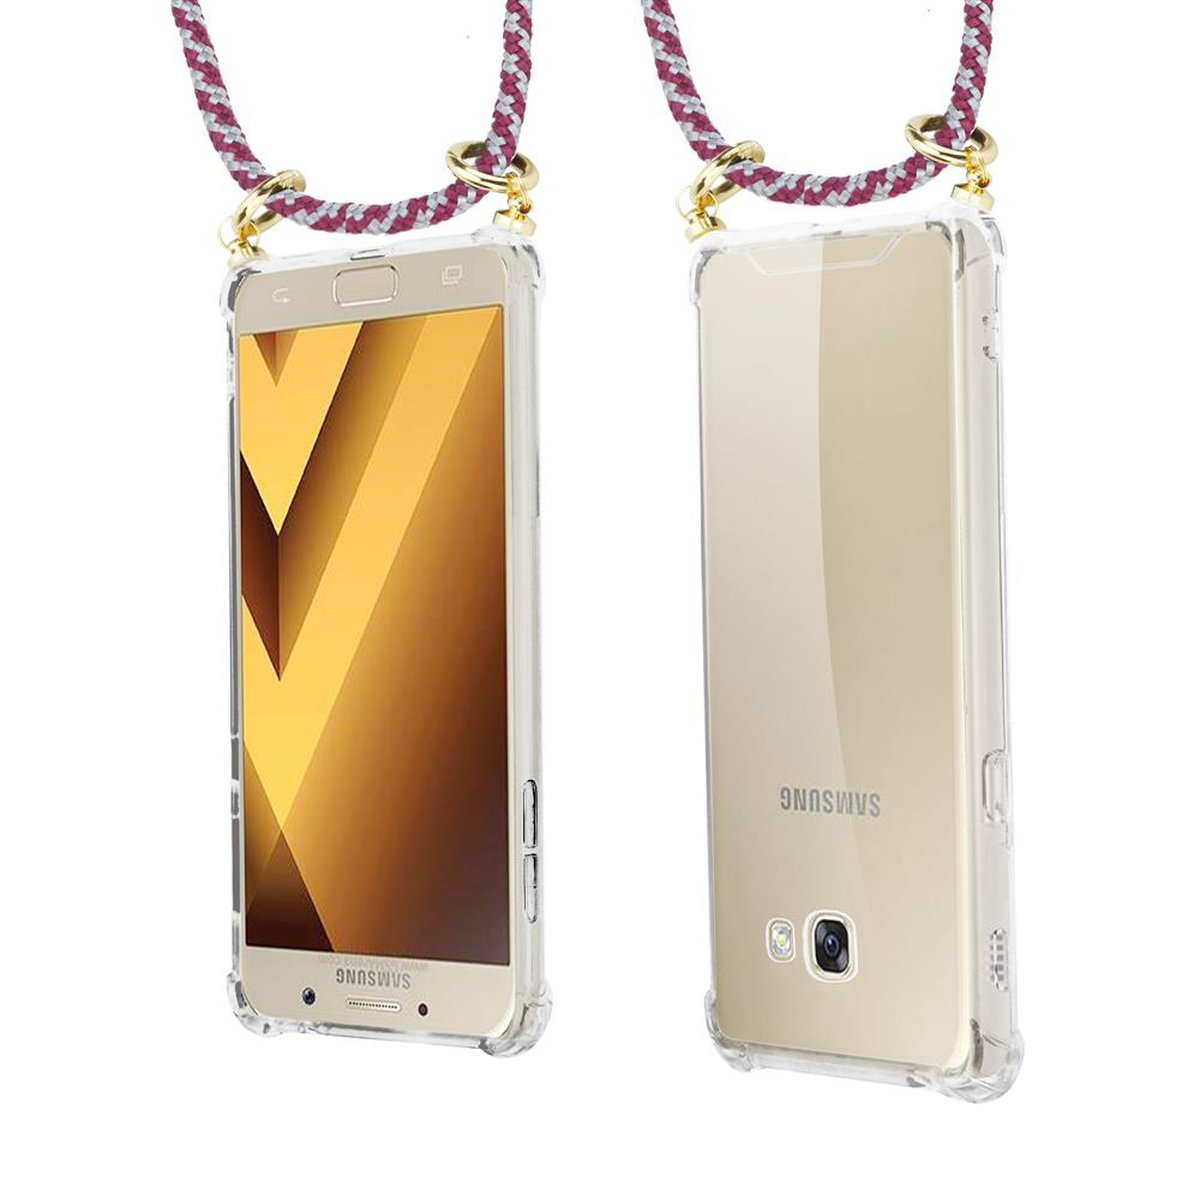 Samsung, Kette WEIß Hülle, und A5 ROT Ringen, mit abnehmbarer Kordel Gold Band Backcover, Handy CADORABO Galaxy 2017,